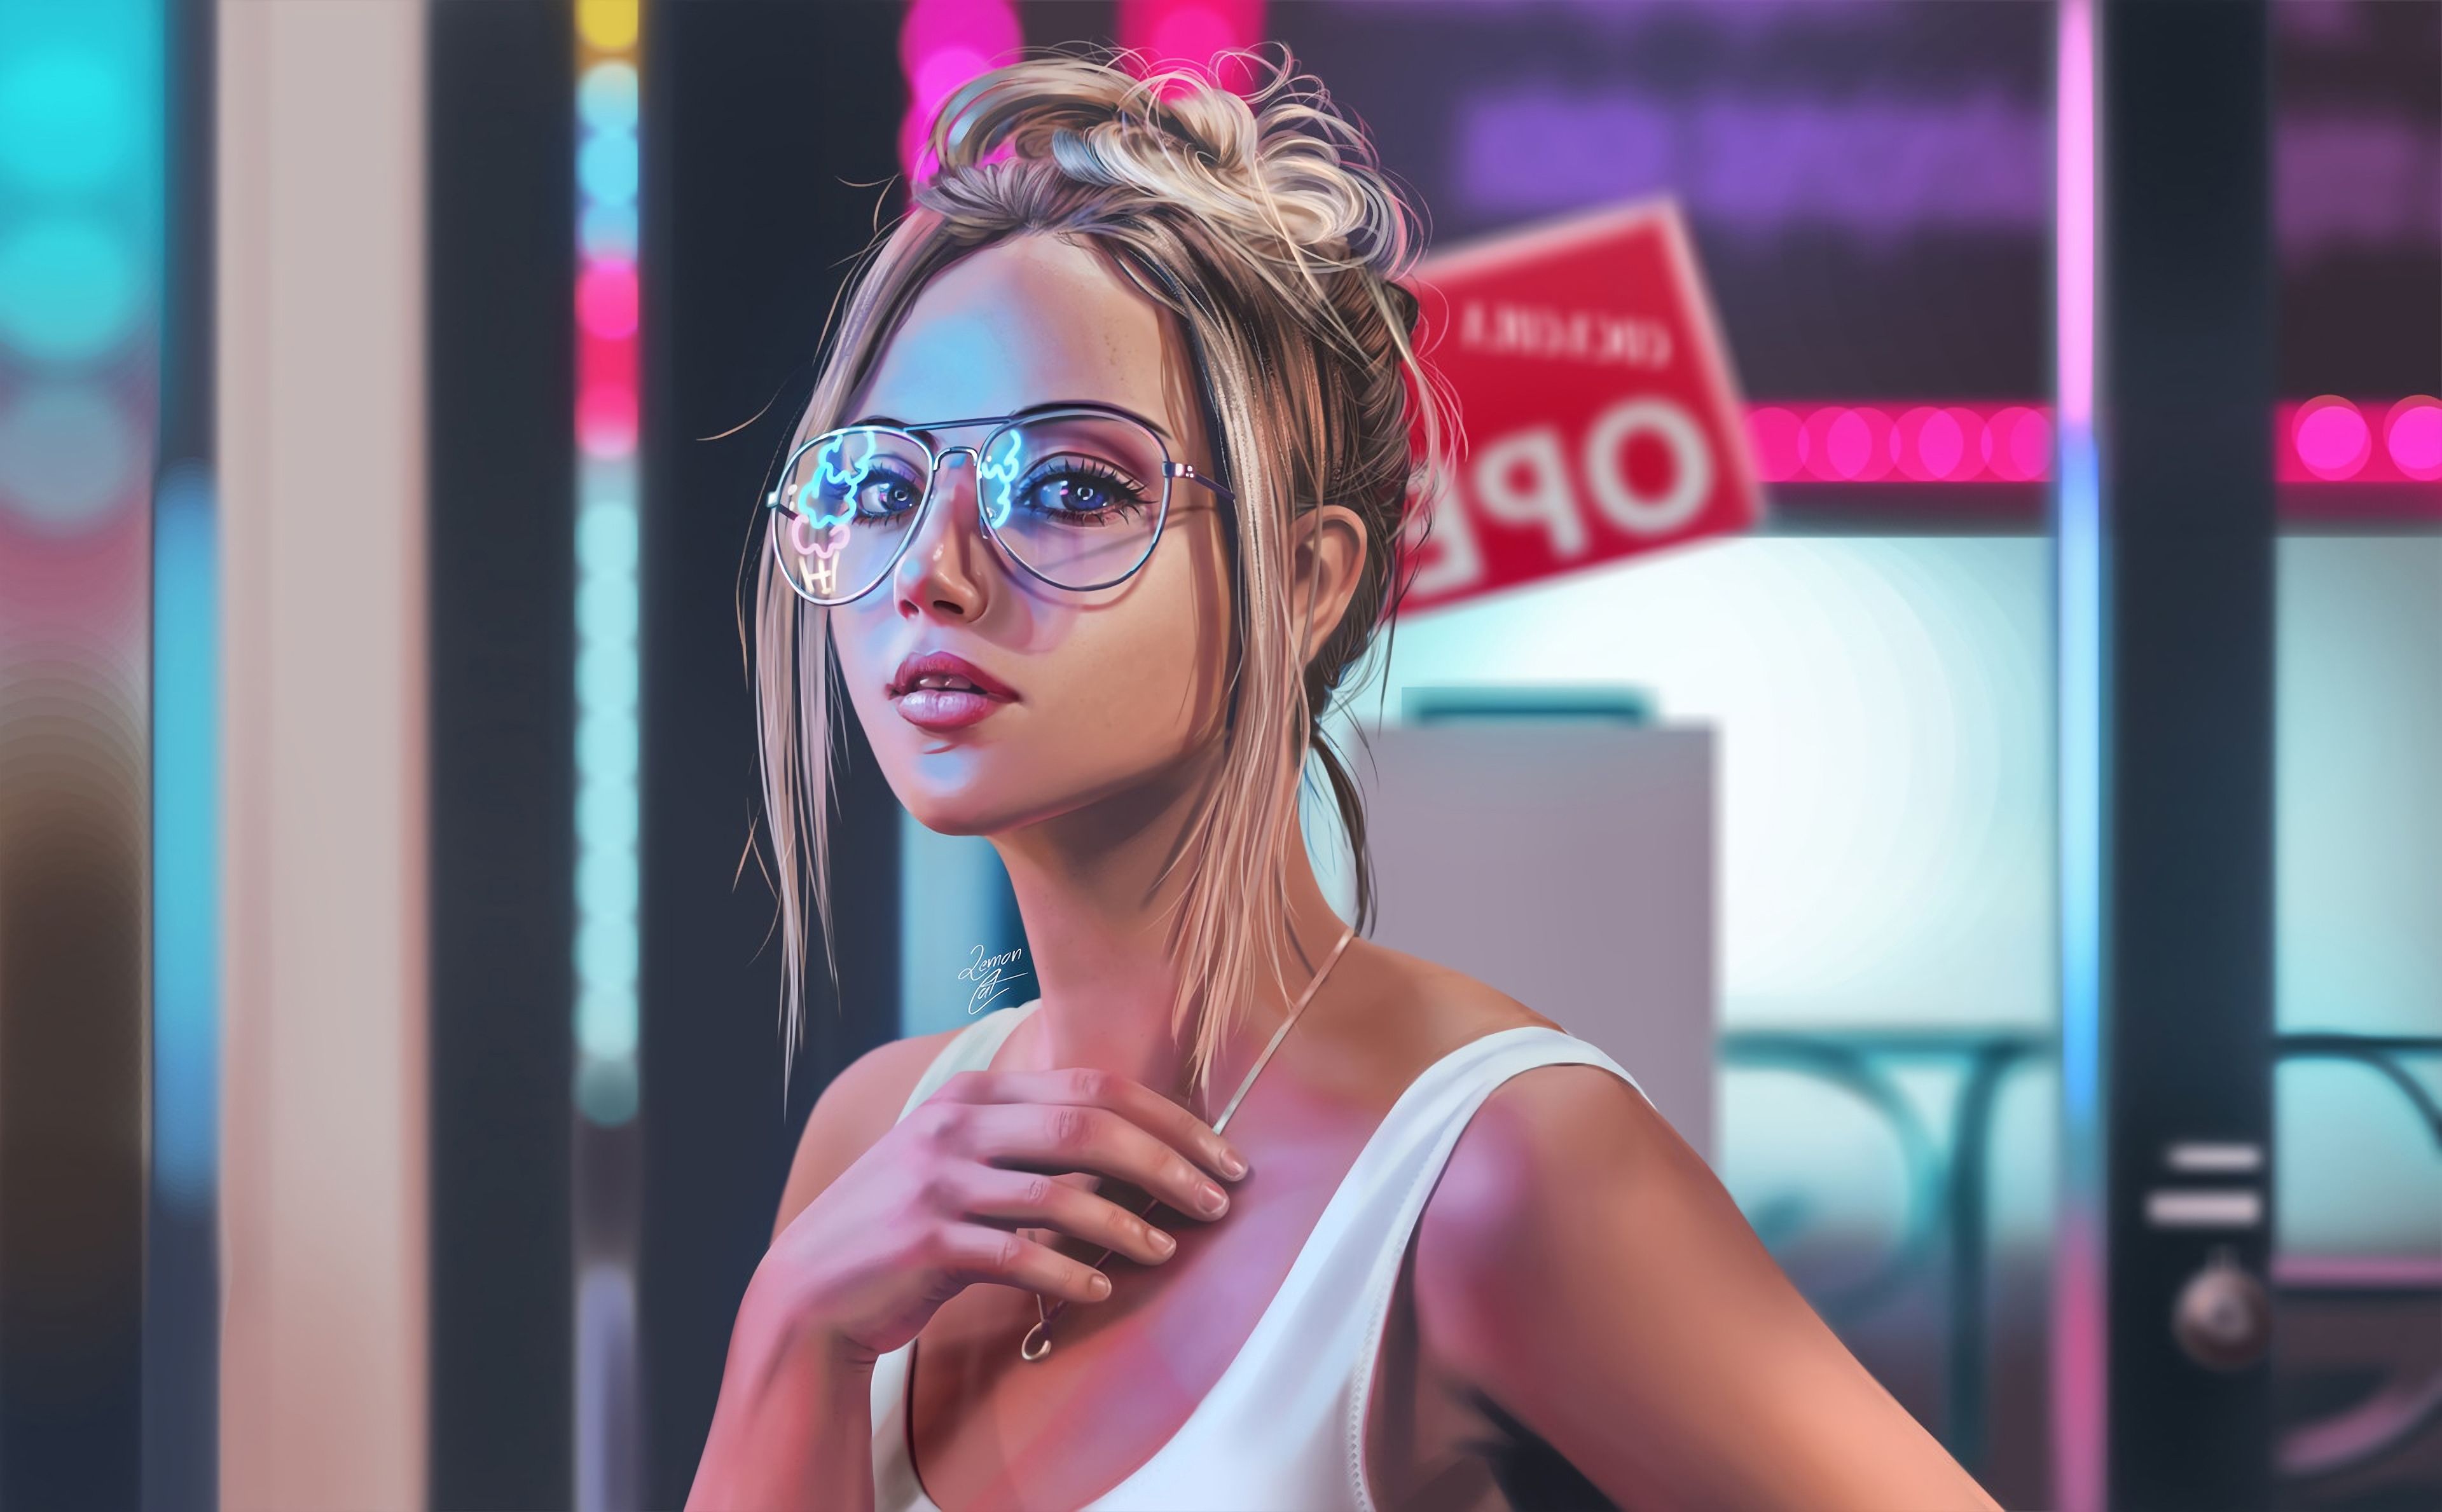 Blonde Girl Neon Digital Art 4k 2048x1152 Resolution HD 4k Wallpaper, Image, Background, Photo and Picture